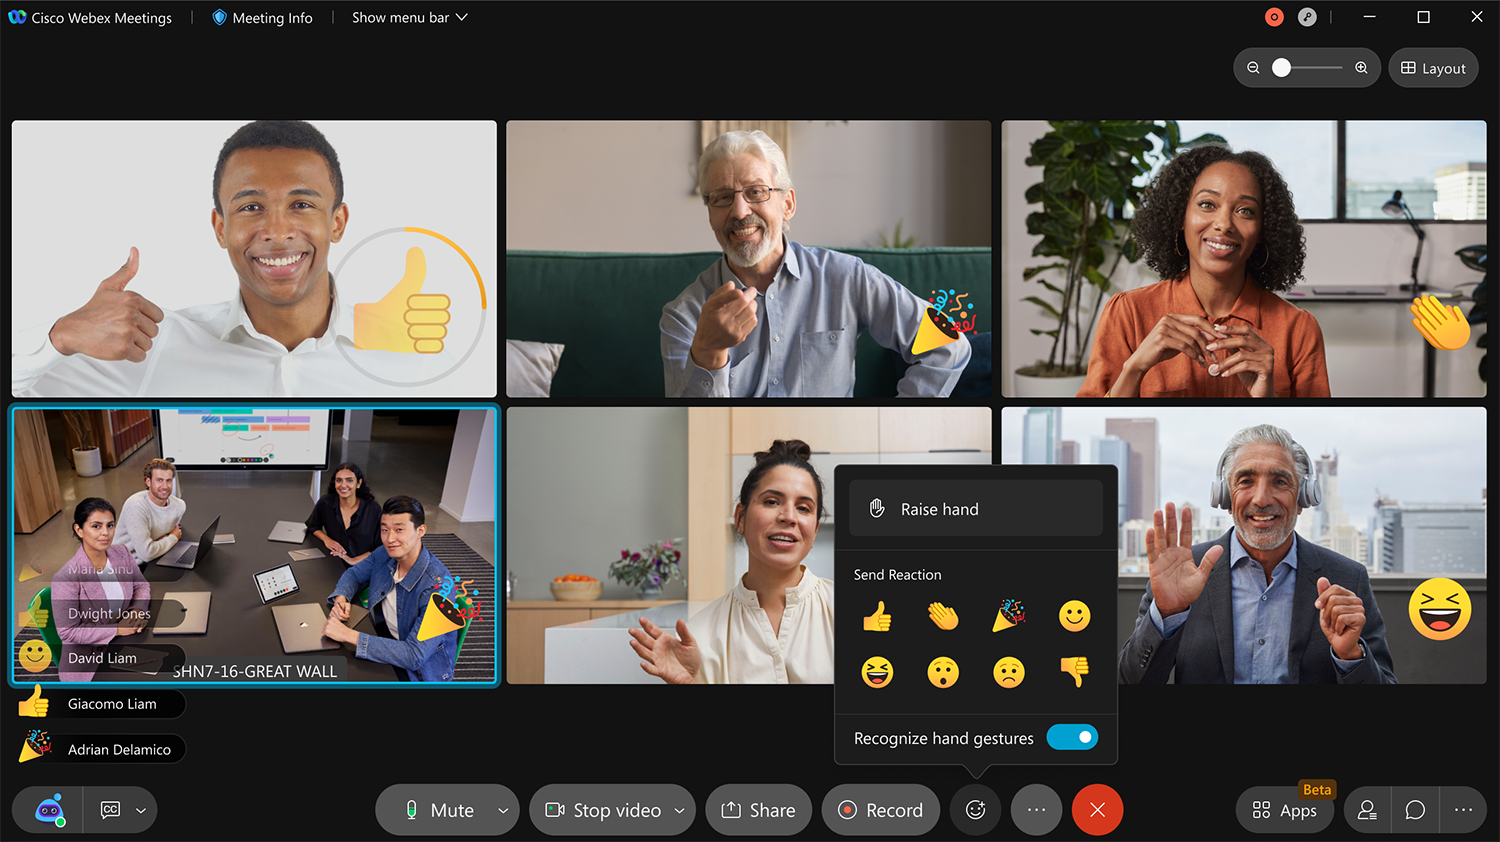 Reactions and gesture recognition lets you send non-verbal feedback into the meeting